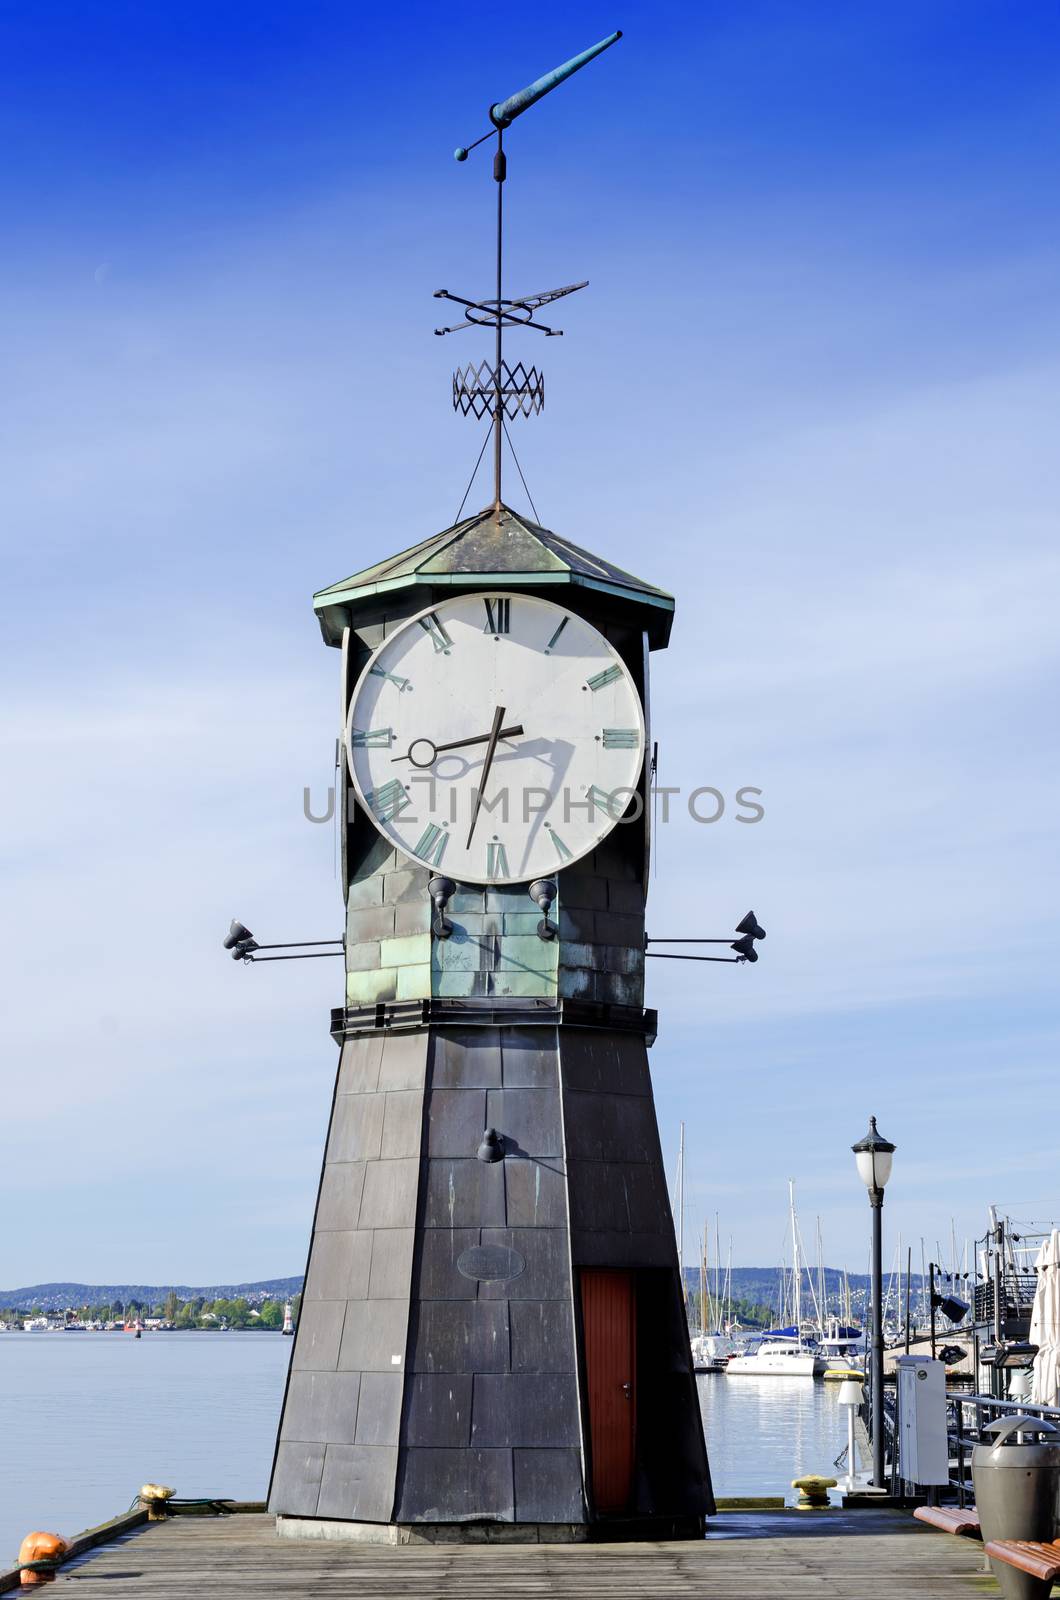 Lighthouse at Aker Brygge in Oslo, Norway